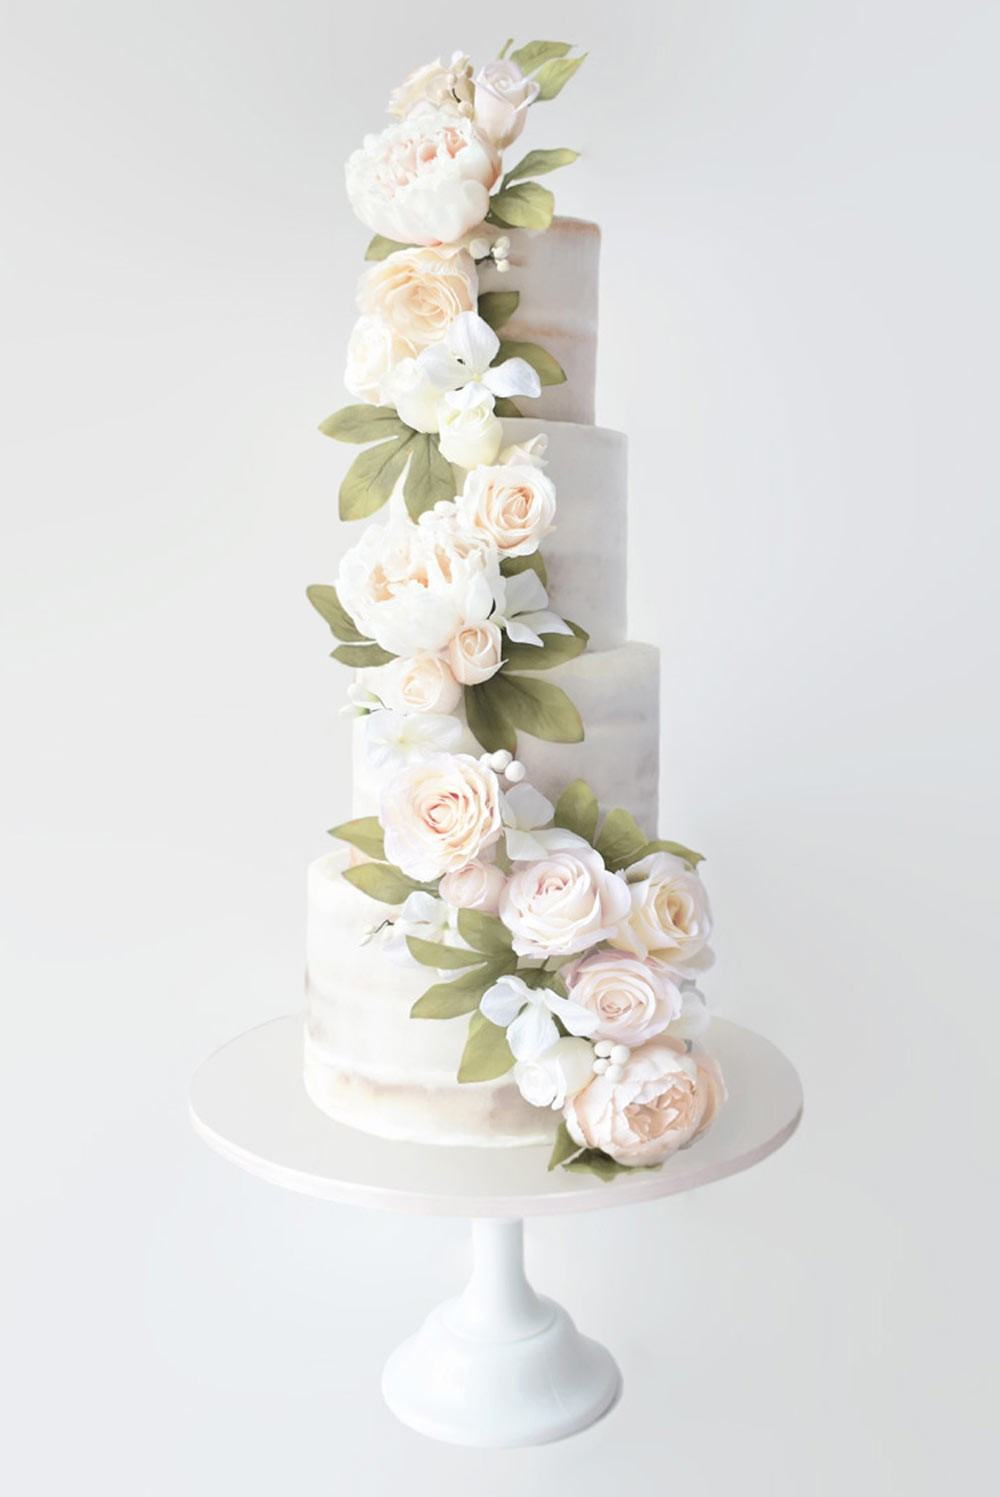 How Much Does Wedding Cake Cost
 Wedding Cake Prices Guide for bud s from £100 to over £